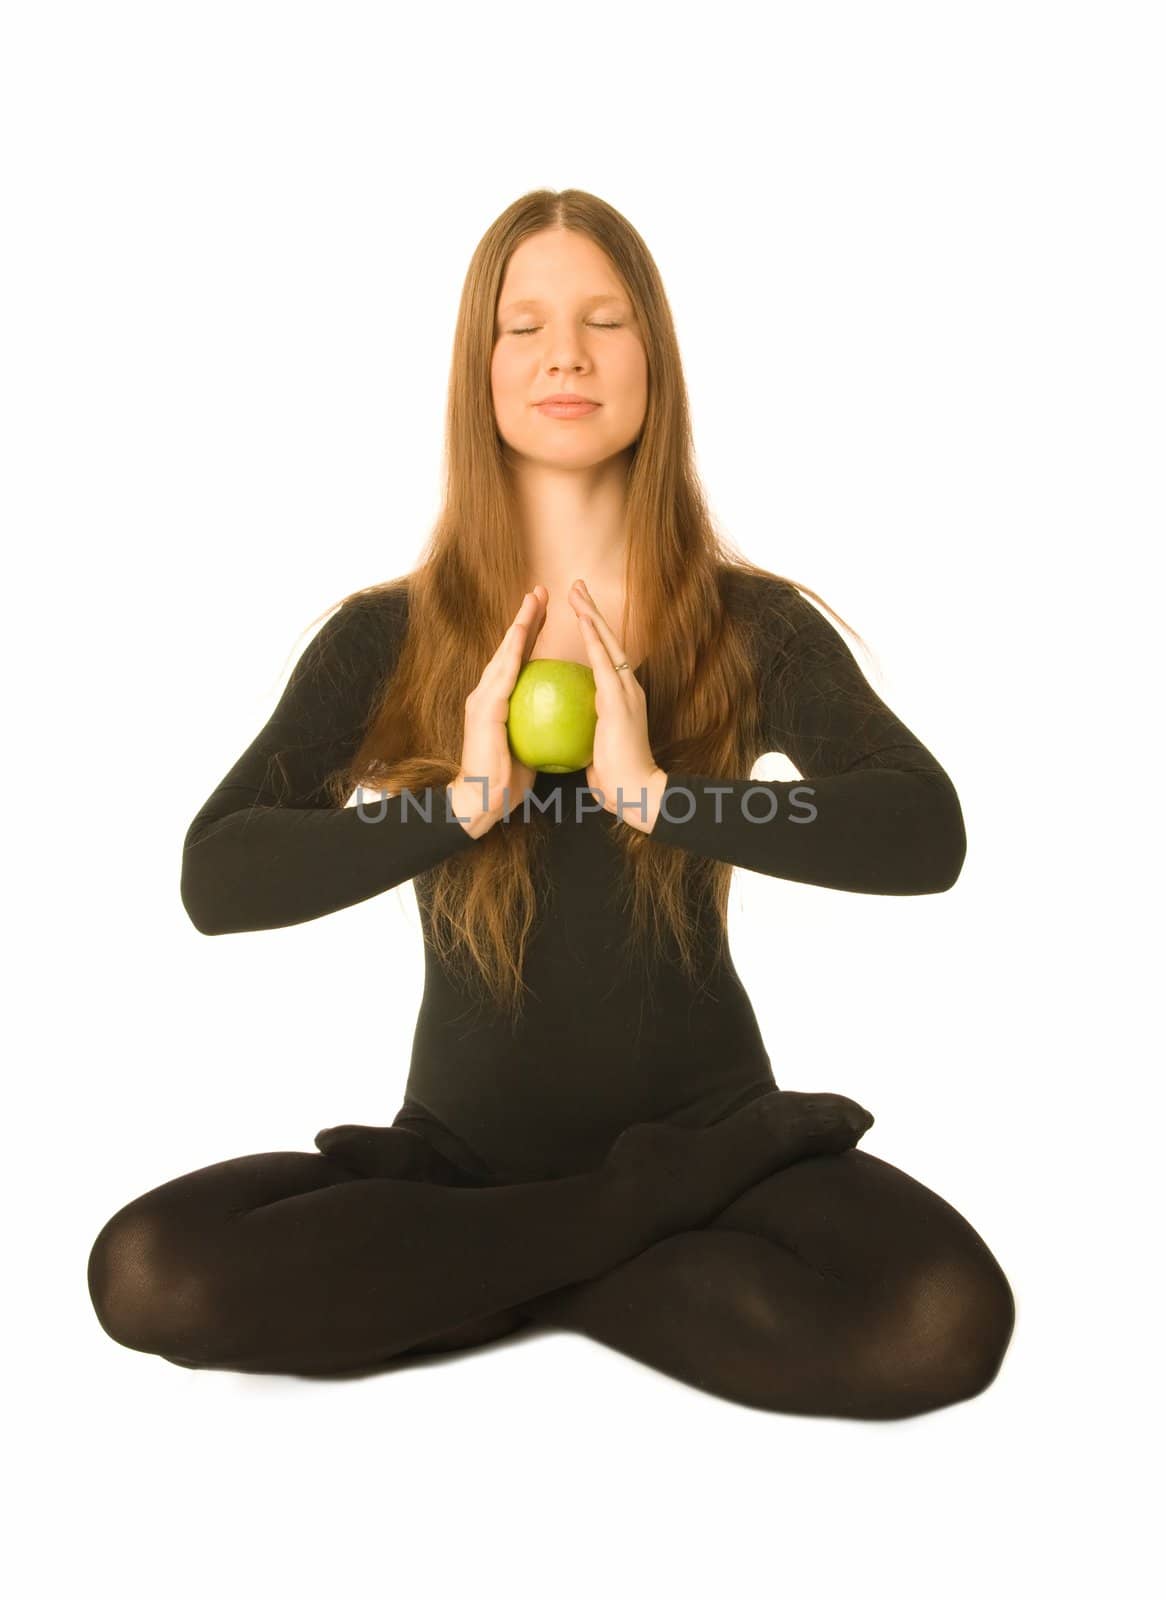 The portrait of a woman in lotus pose with a green apple in her hands